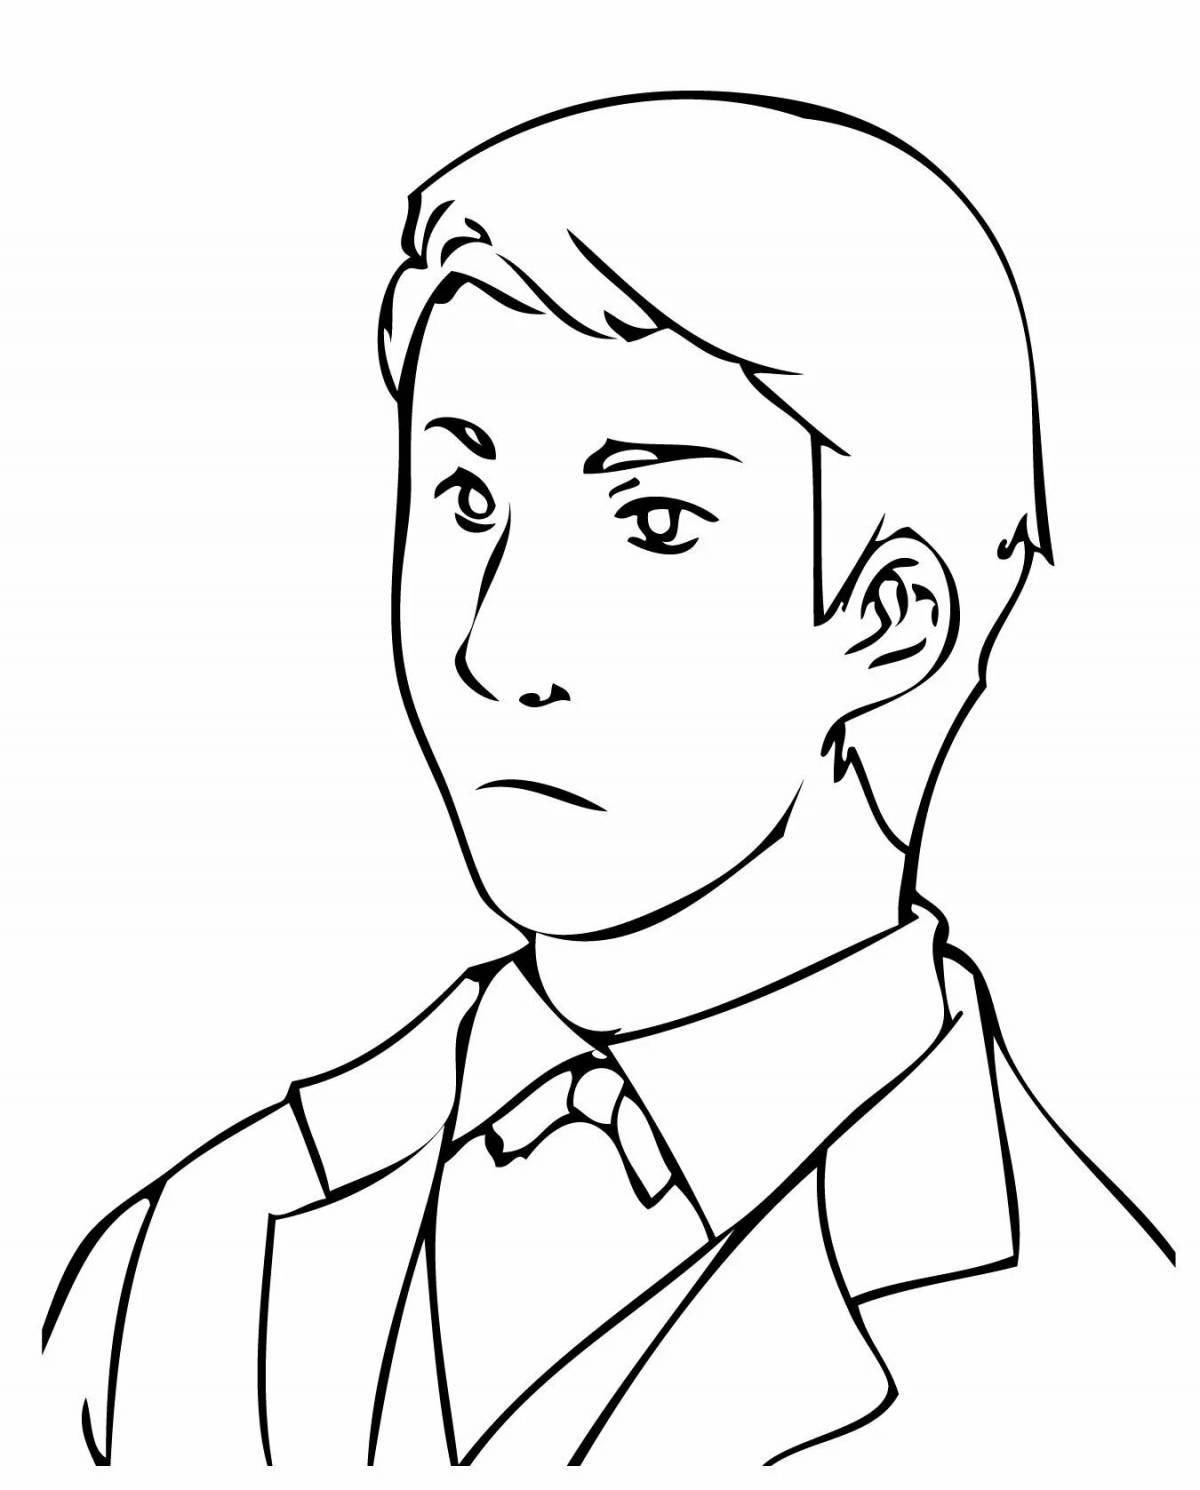 A striking man's face coloring page